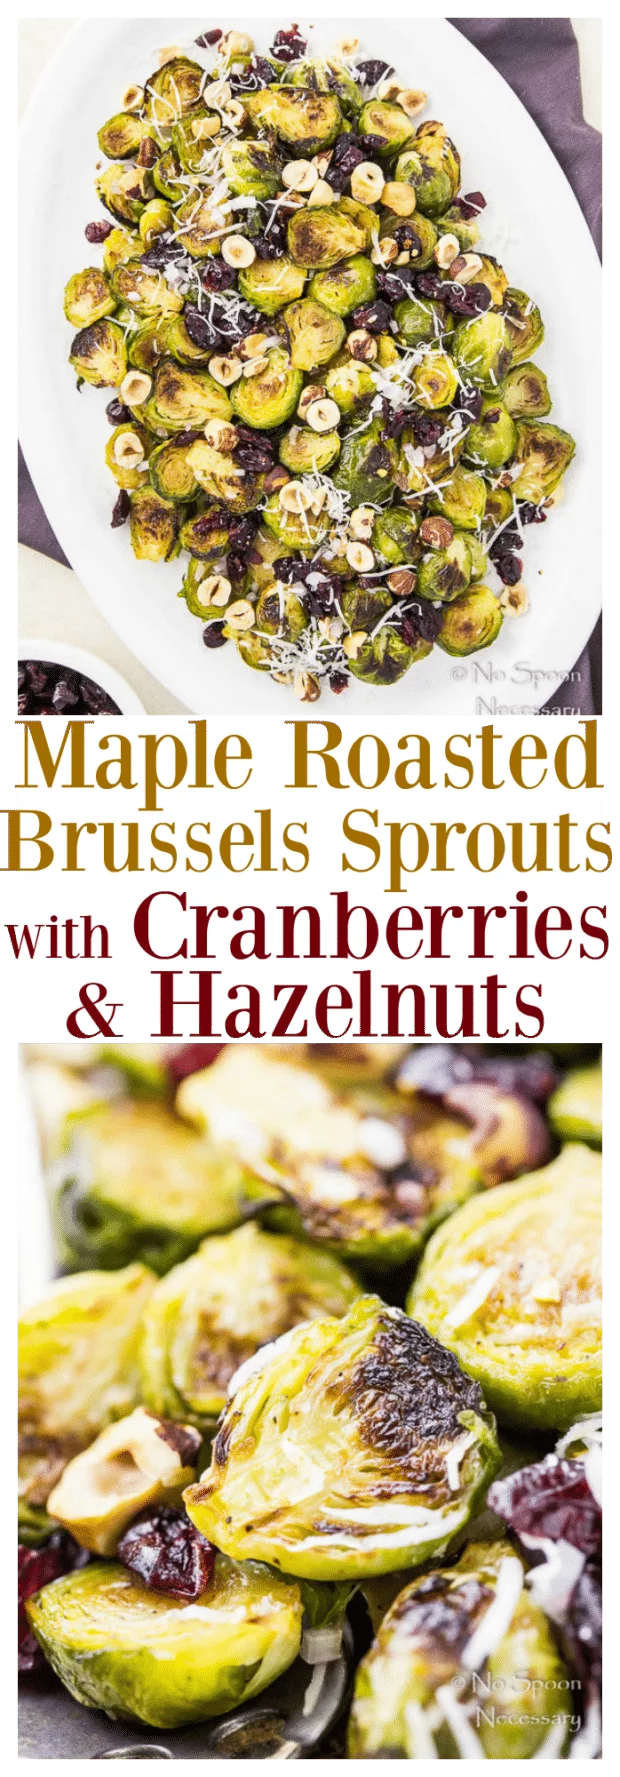 Maple Roasted Brussels Sprouts with Cranberries & Hazelnuts